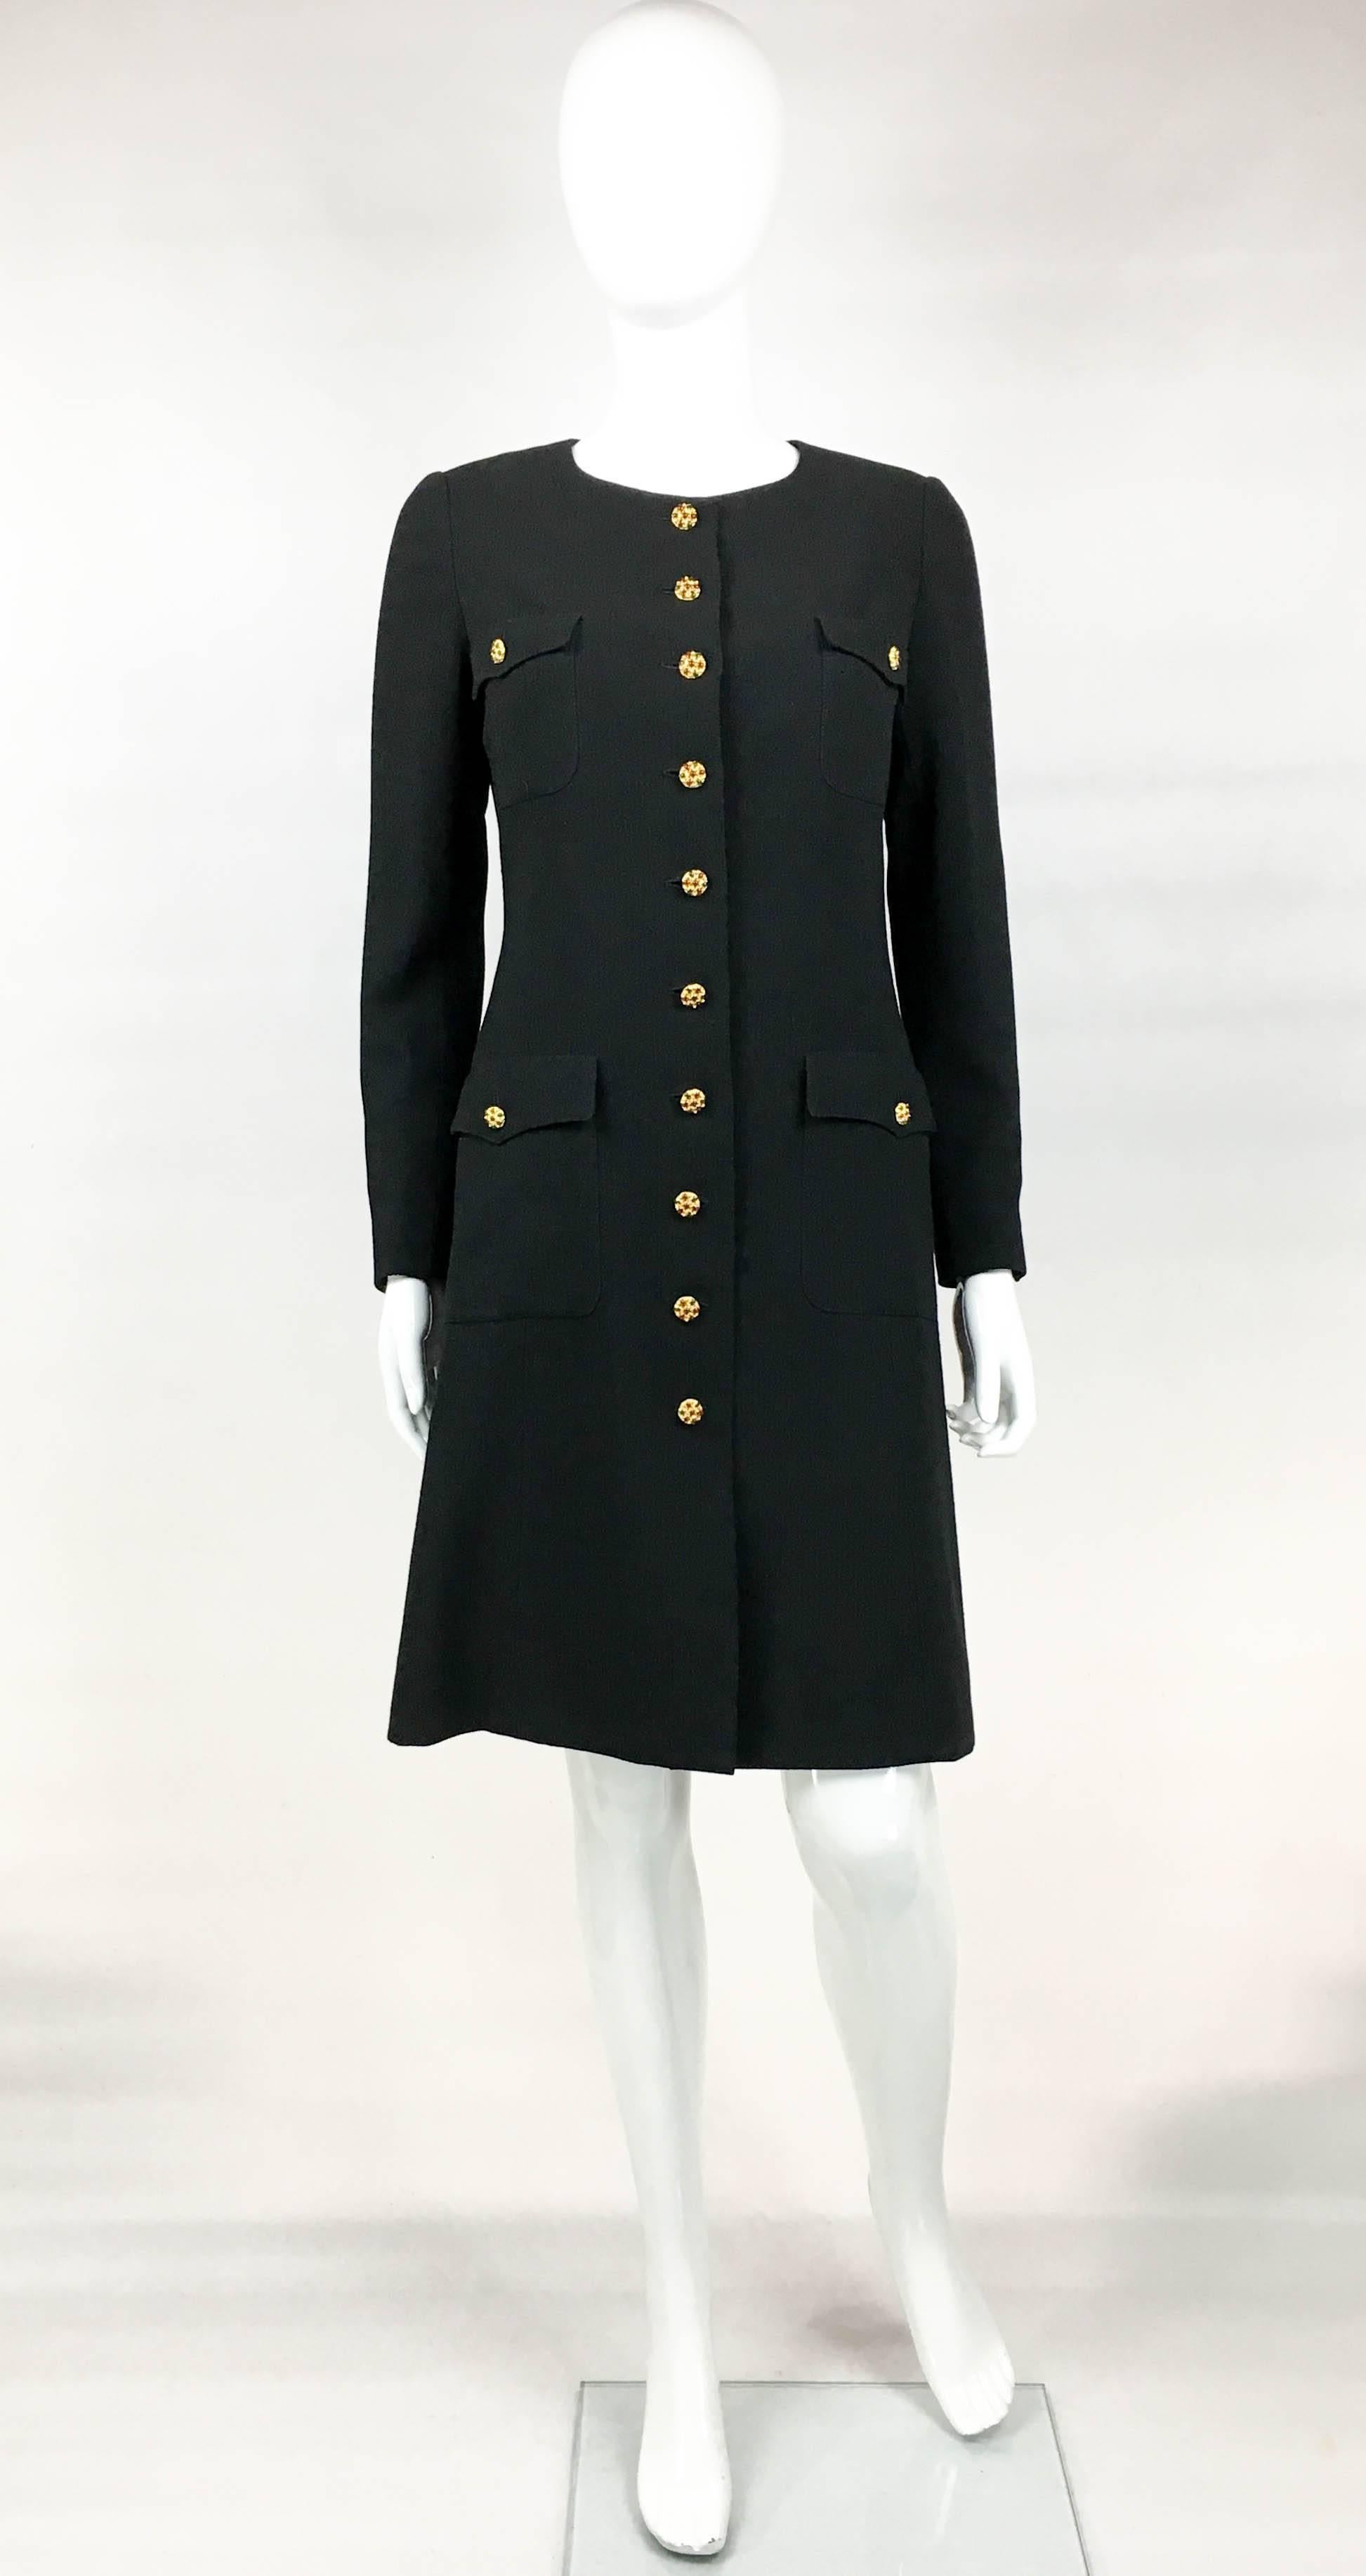 Vintage Chanel Runway Look Black Wool Coat/Dress With Baroque-esque Buttons. This gorgeous piece by Chanel was designed for the 1996 Autumn / Winter Collection and the runway show (refer to photos). Made in light black wool and lined in black silk,